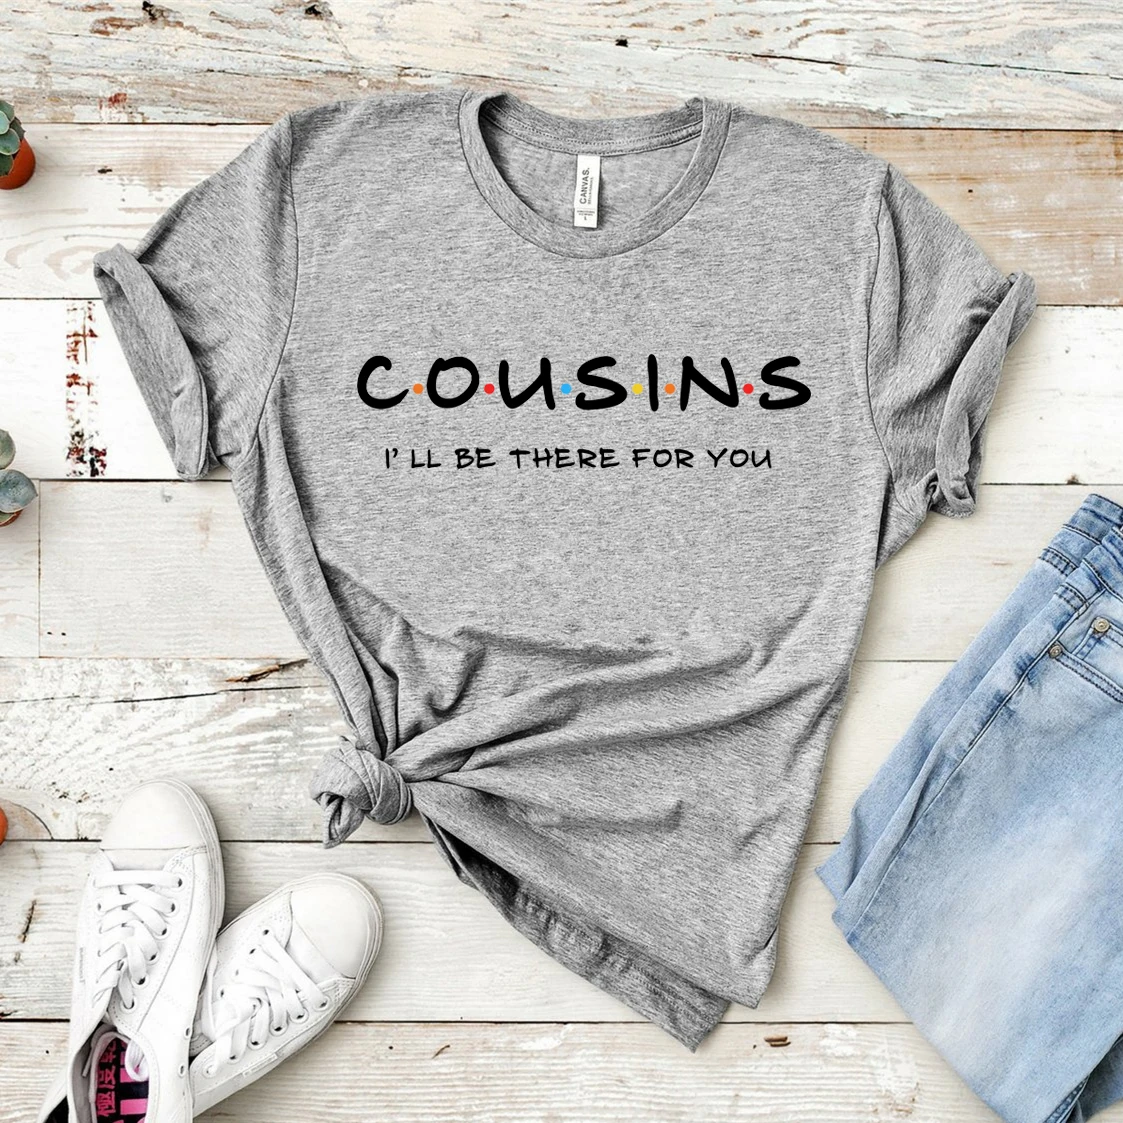 Cousins Shirt Cousins I'll Be There for You Shirts Friends Themed T-Shirt Matching Funny Family Tees Casual Ladies Tops